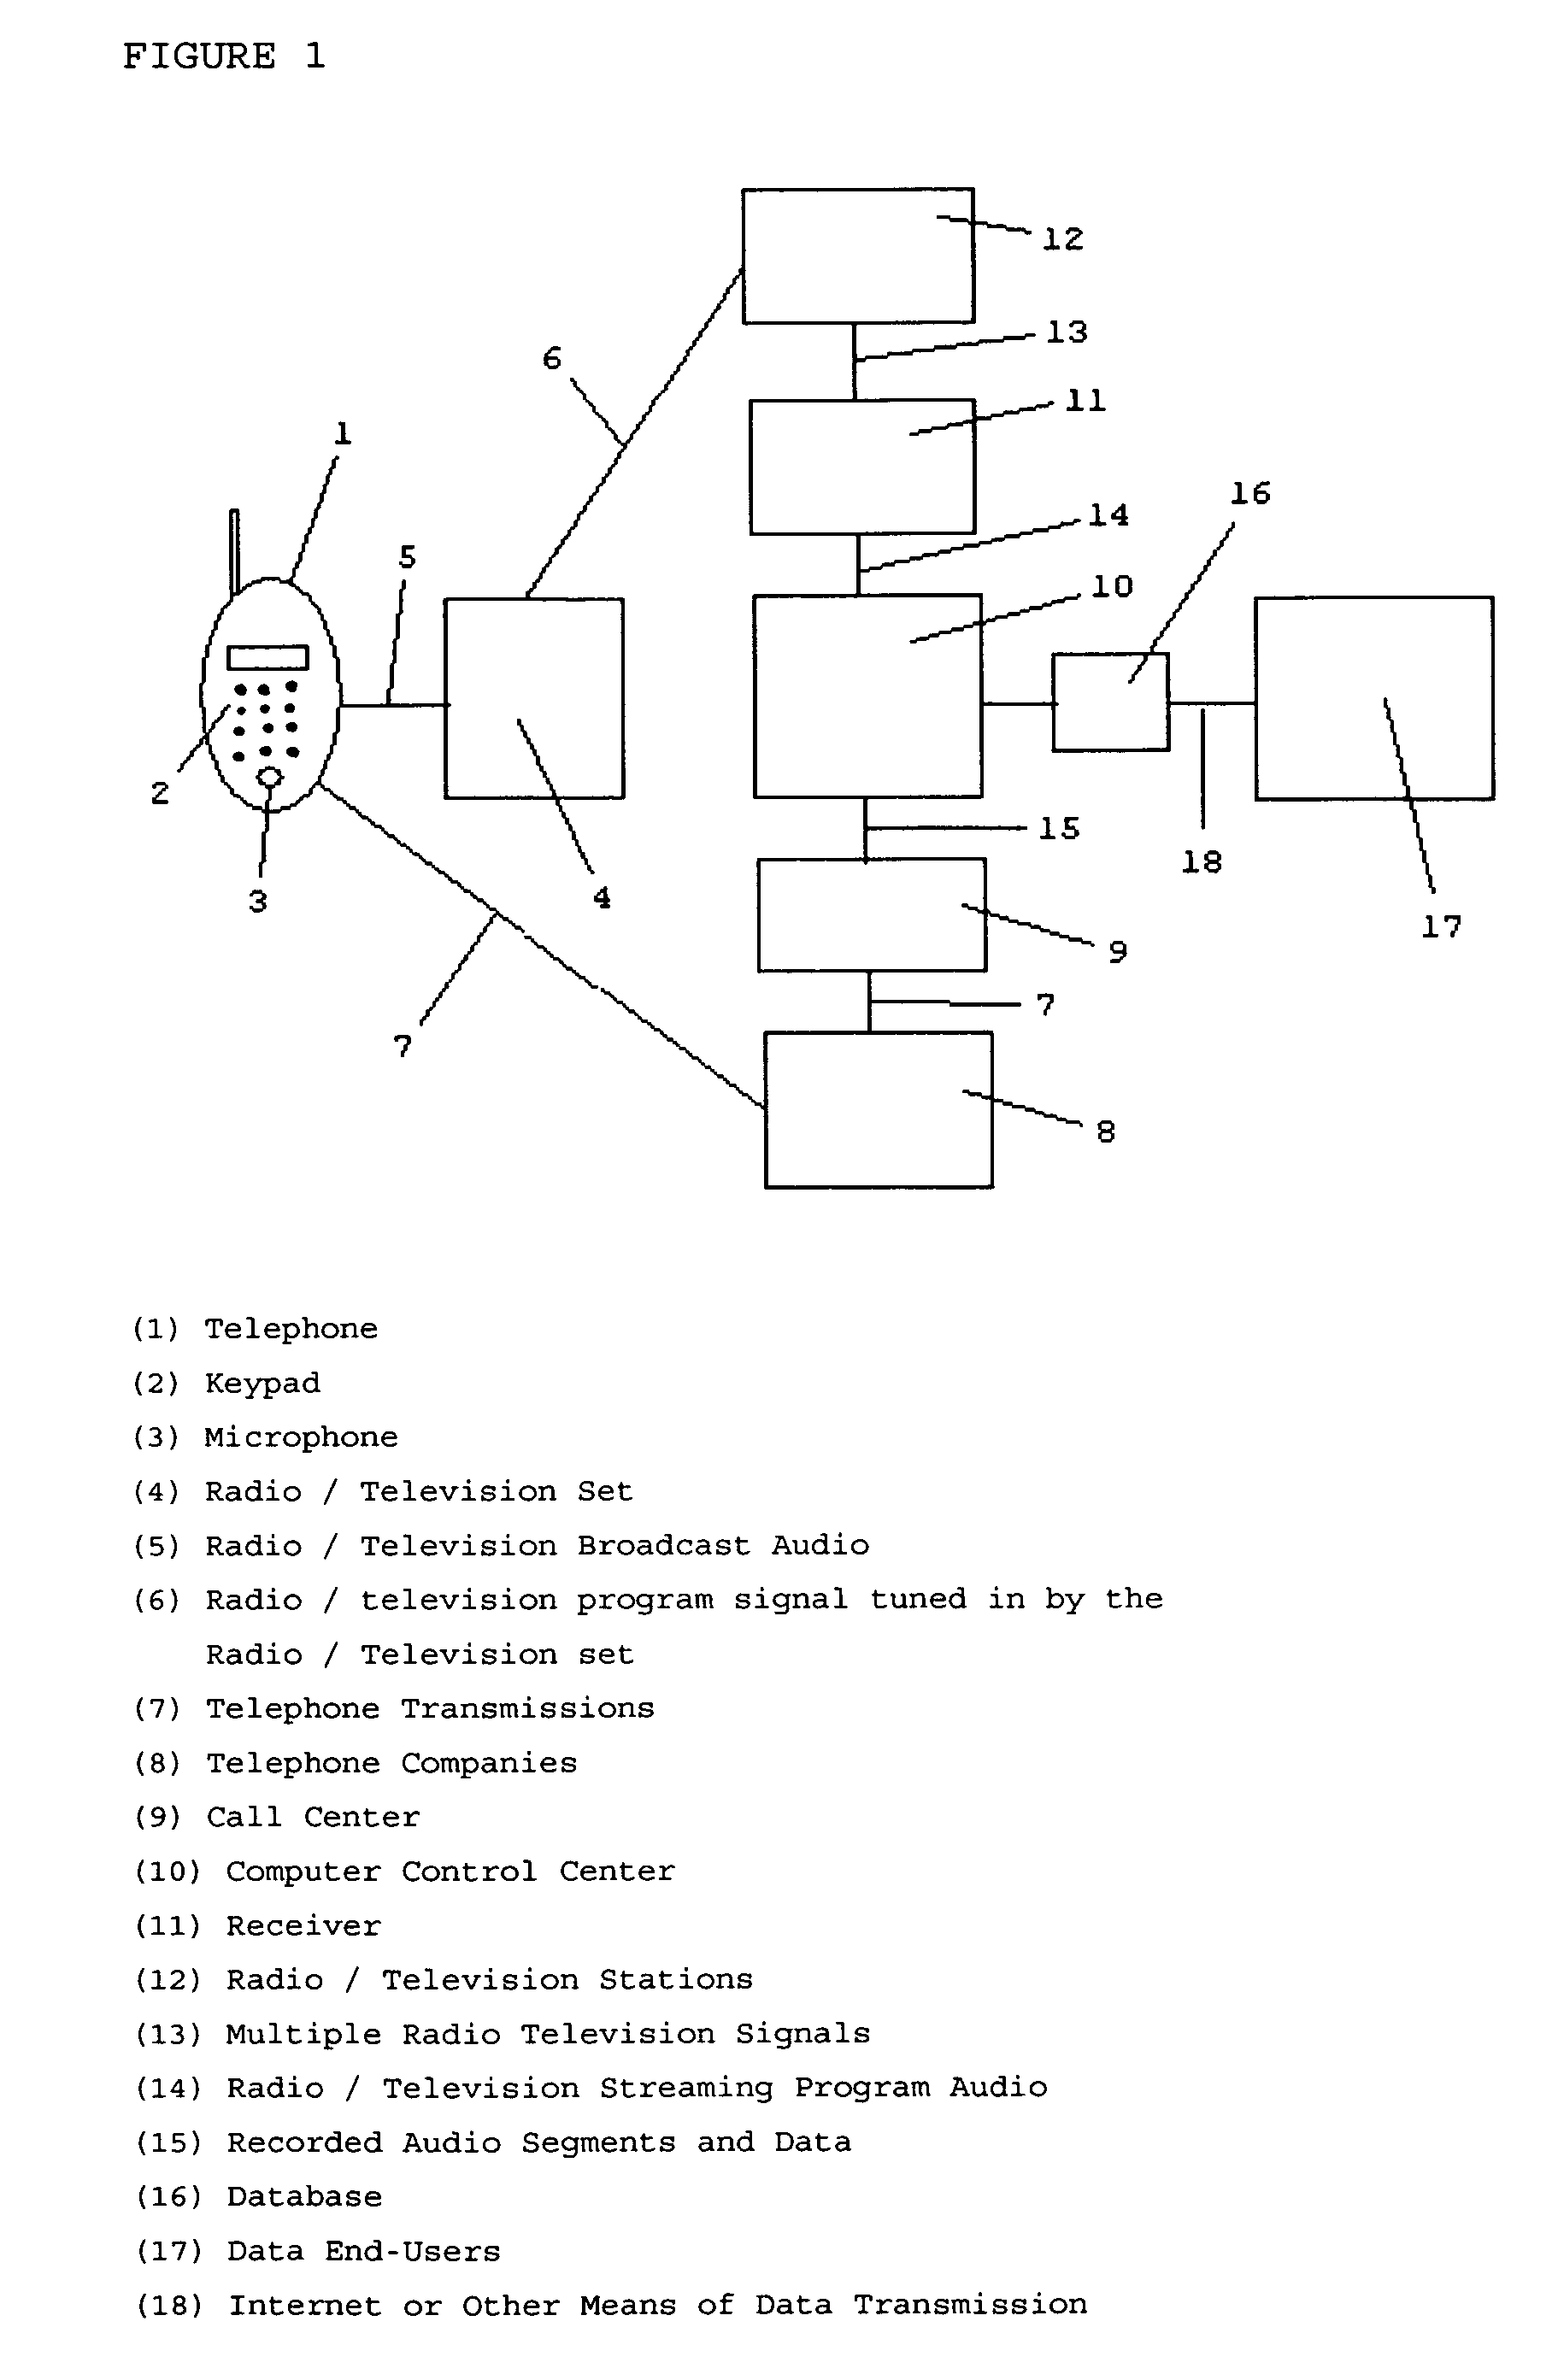 Method and system for gathering and recording real-time market survey and other data from radio listeners and television viewers utilizing telephones including wireless cell phones